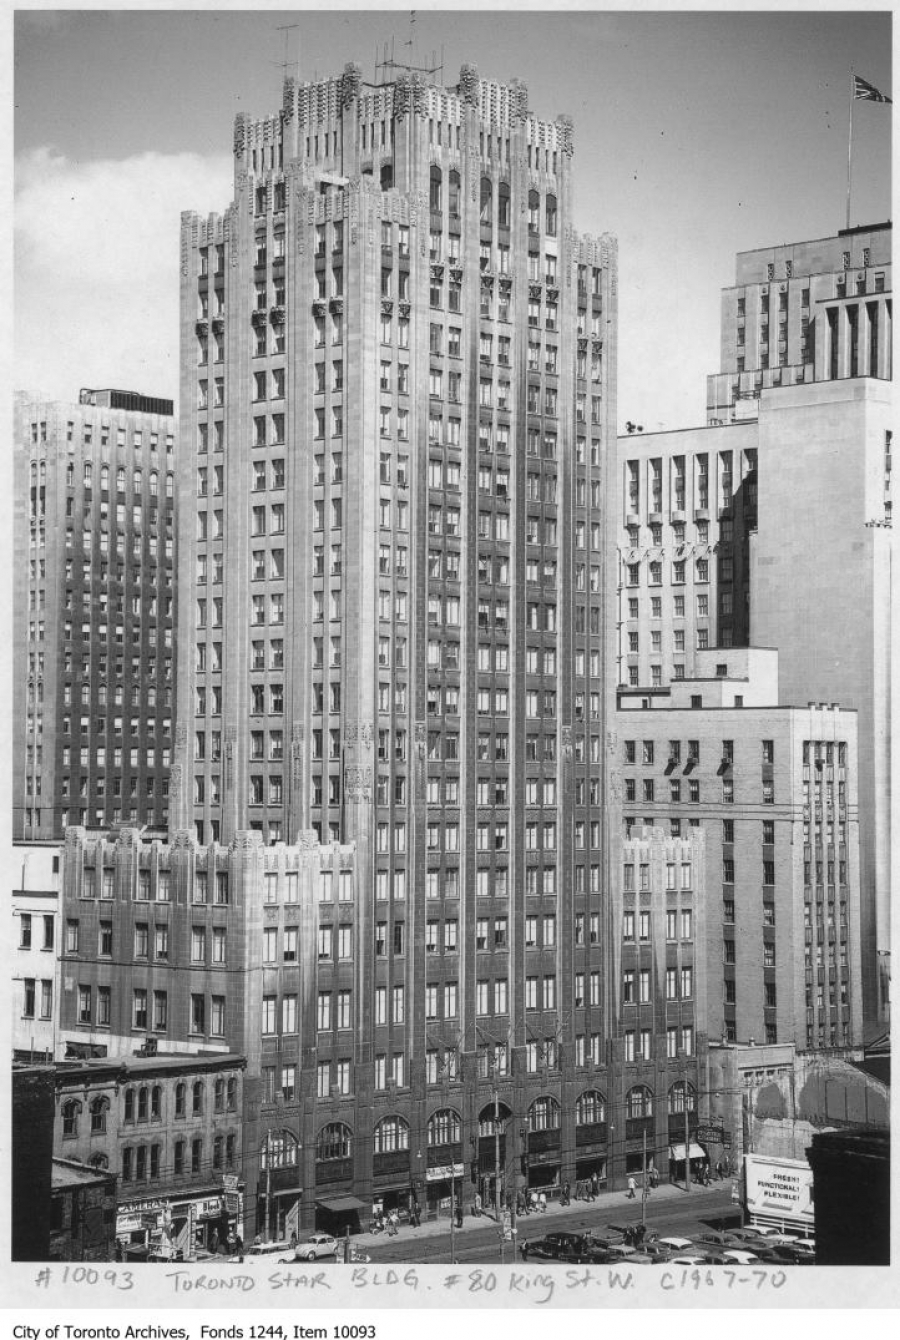 The Toronto Star Building at 80 King Street West in 1967. (Courtesy of the City of Toronto Archives.)